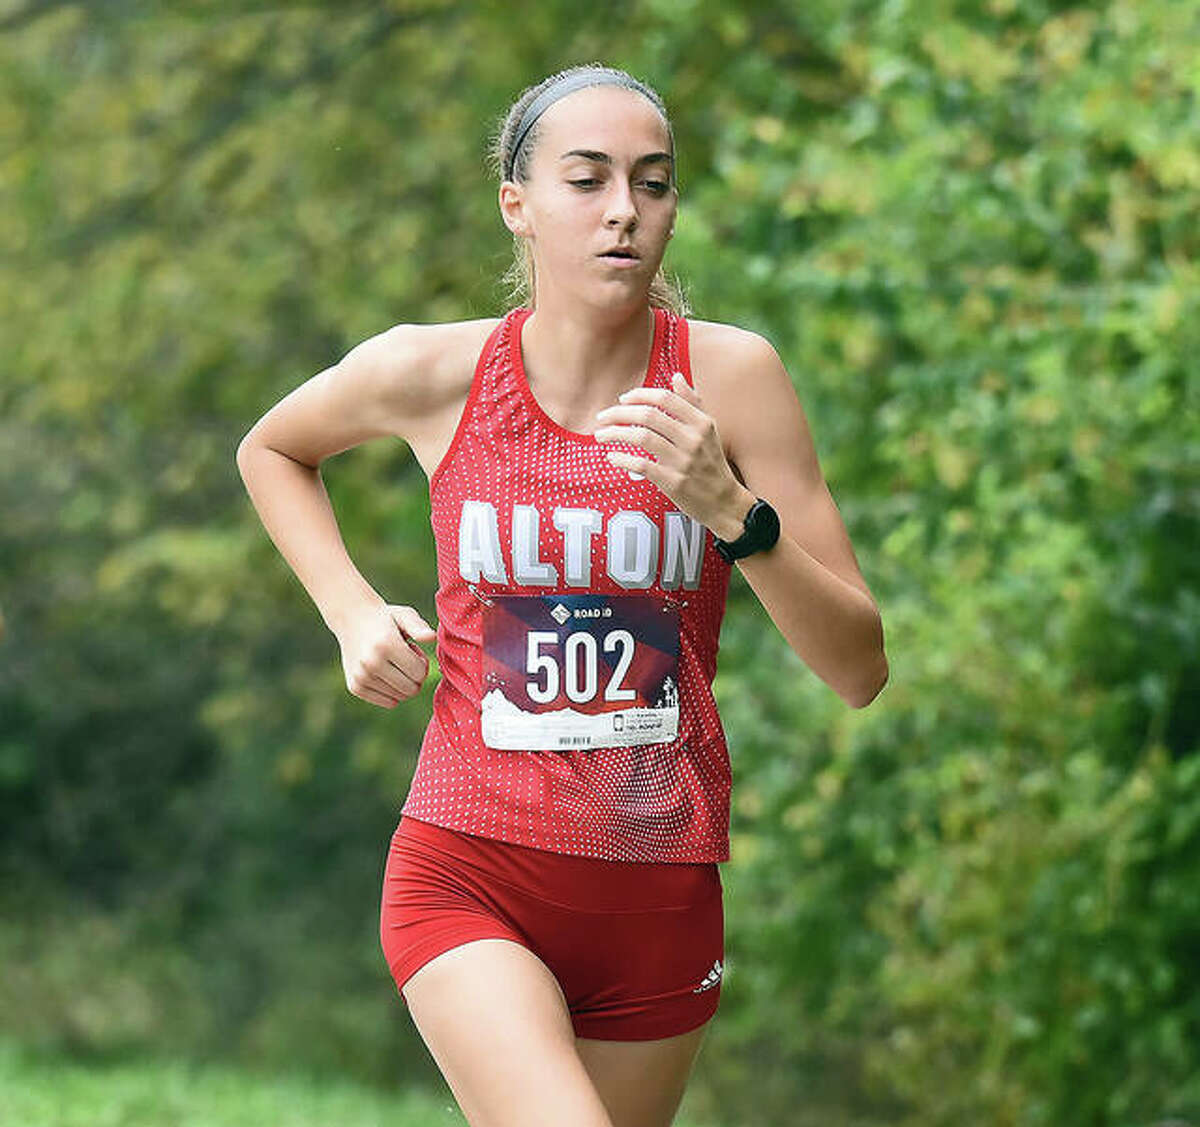 Sophia Paschal of Alton runs the course at Thursday’s Southwestern Conference girls cross country meet in Belleville. Paschal was the Redbirds’ lone runner at the meet and finished 18th in a time of 20:53.70.